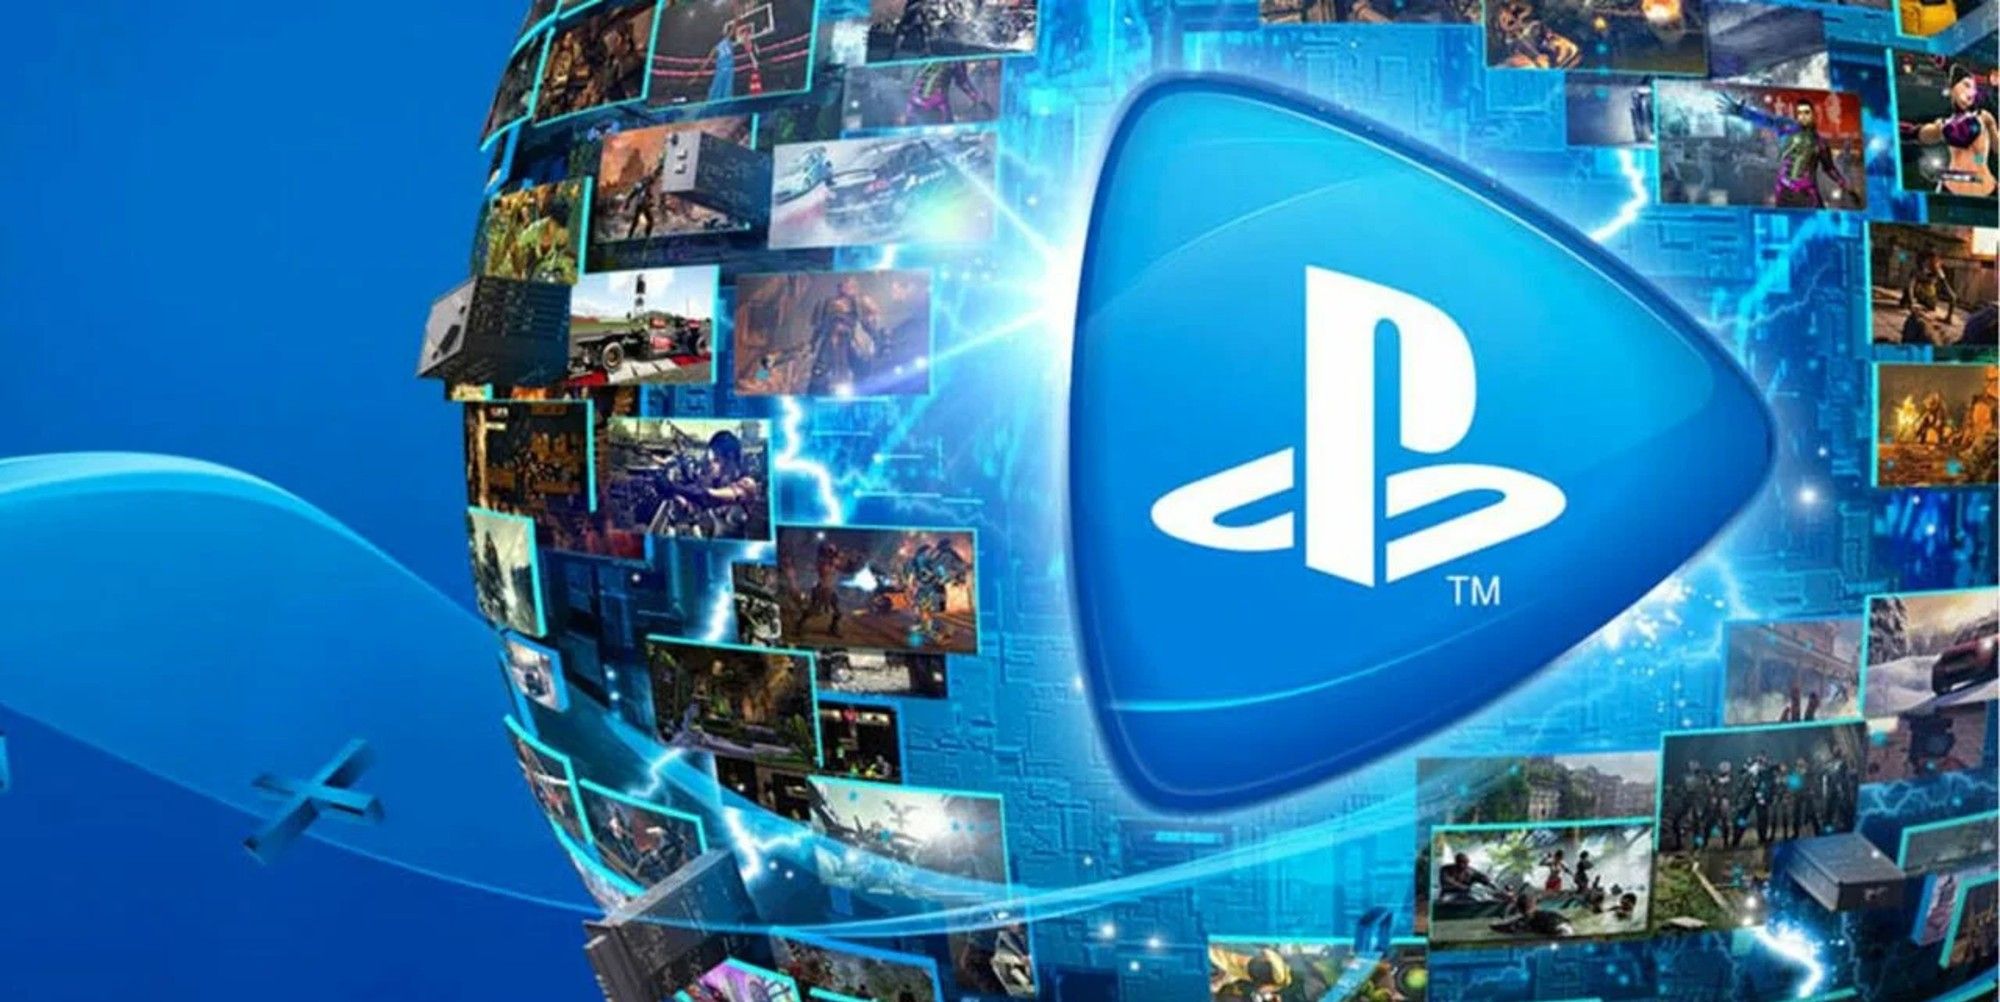 PlayStation Plus Premium price: How to lock in $60 rate with PS Now